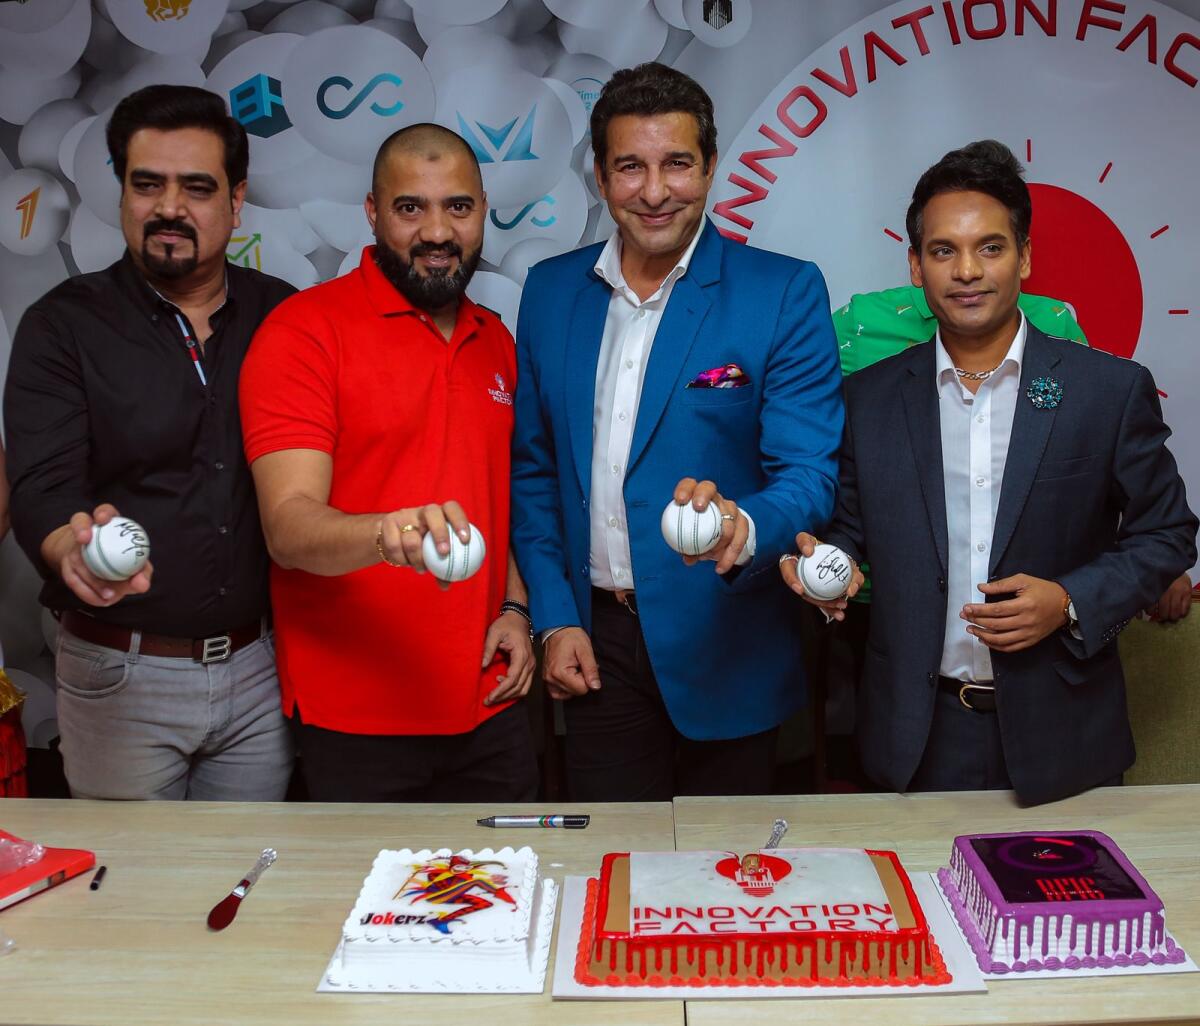 Cricket legend Wasim Akram (second from left) at an event in Dubai on Tuesday. (Supplied photo)